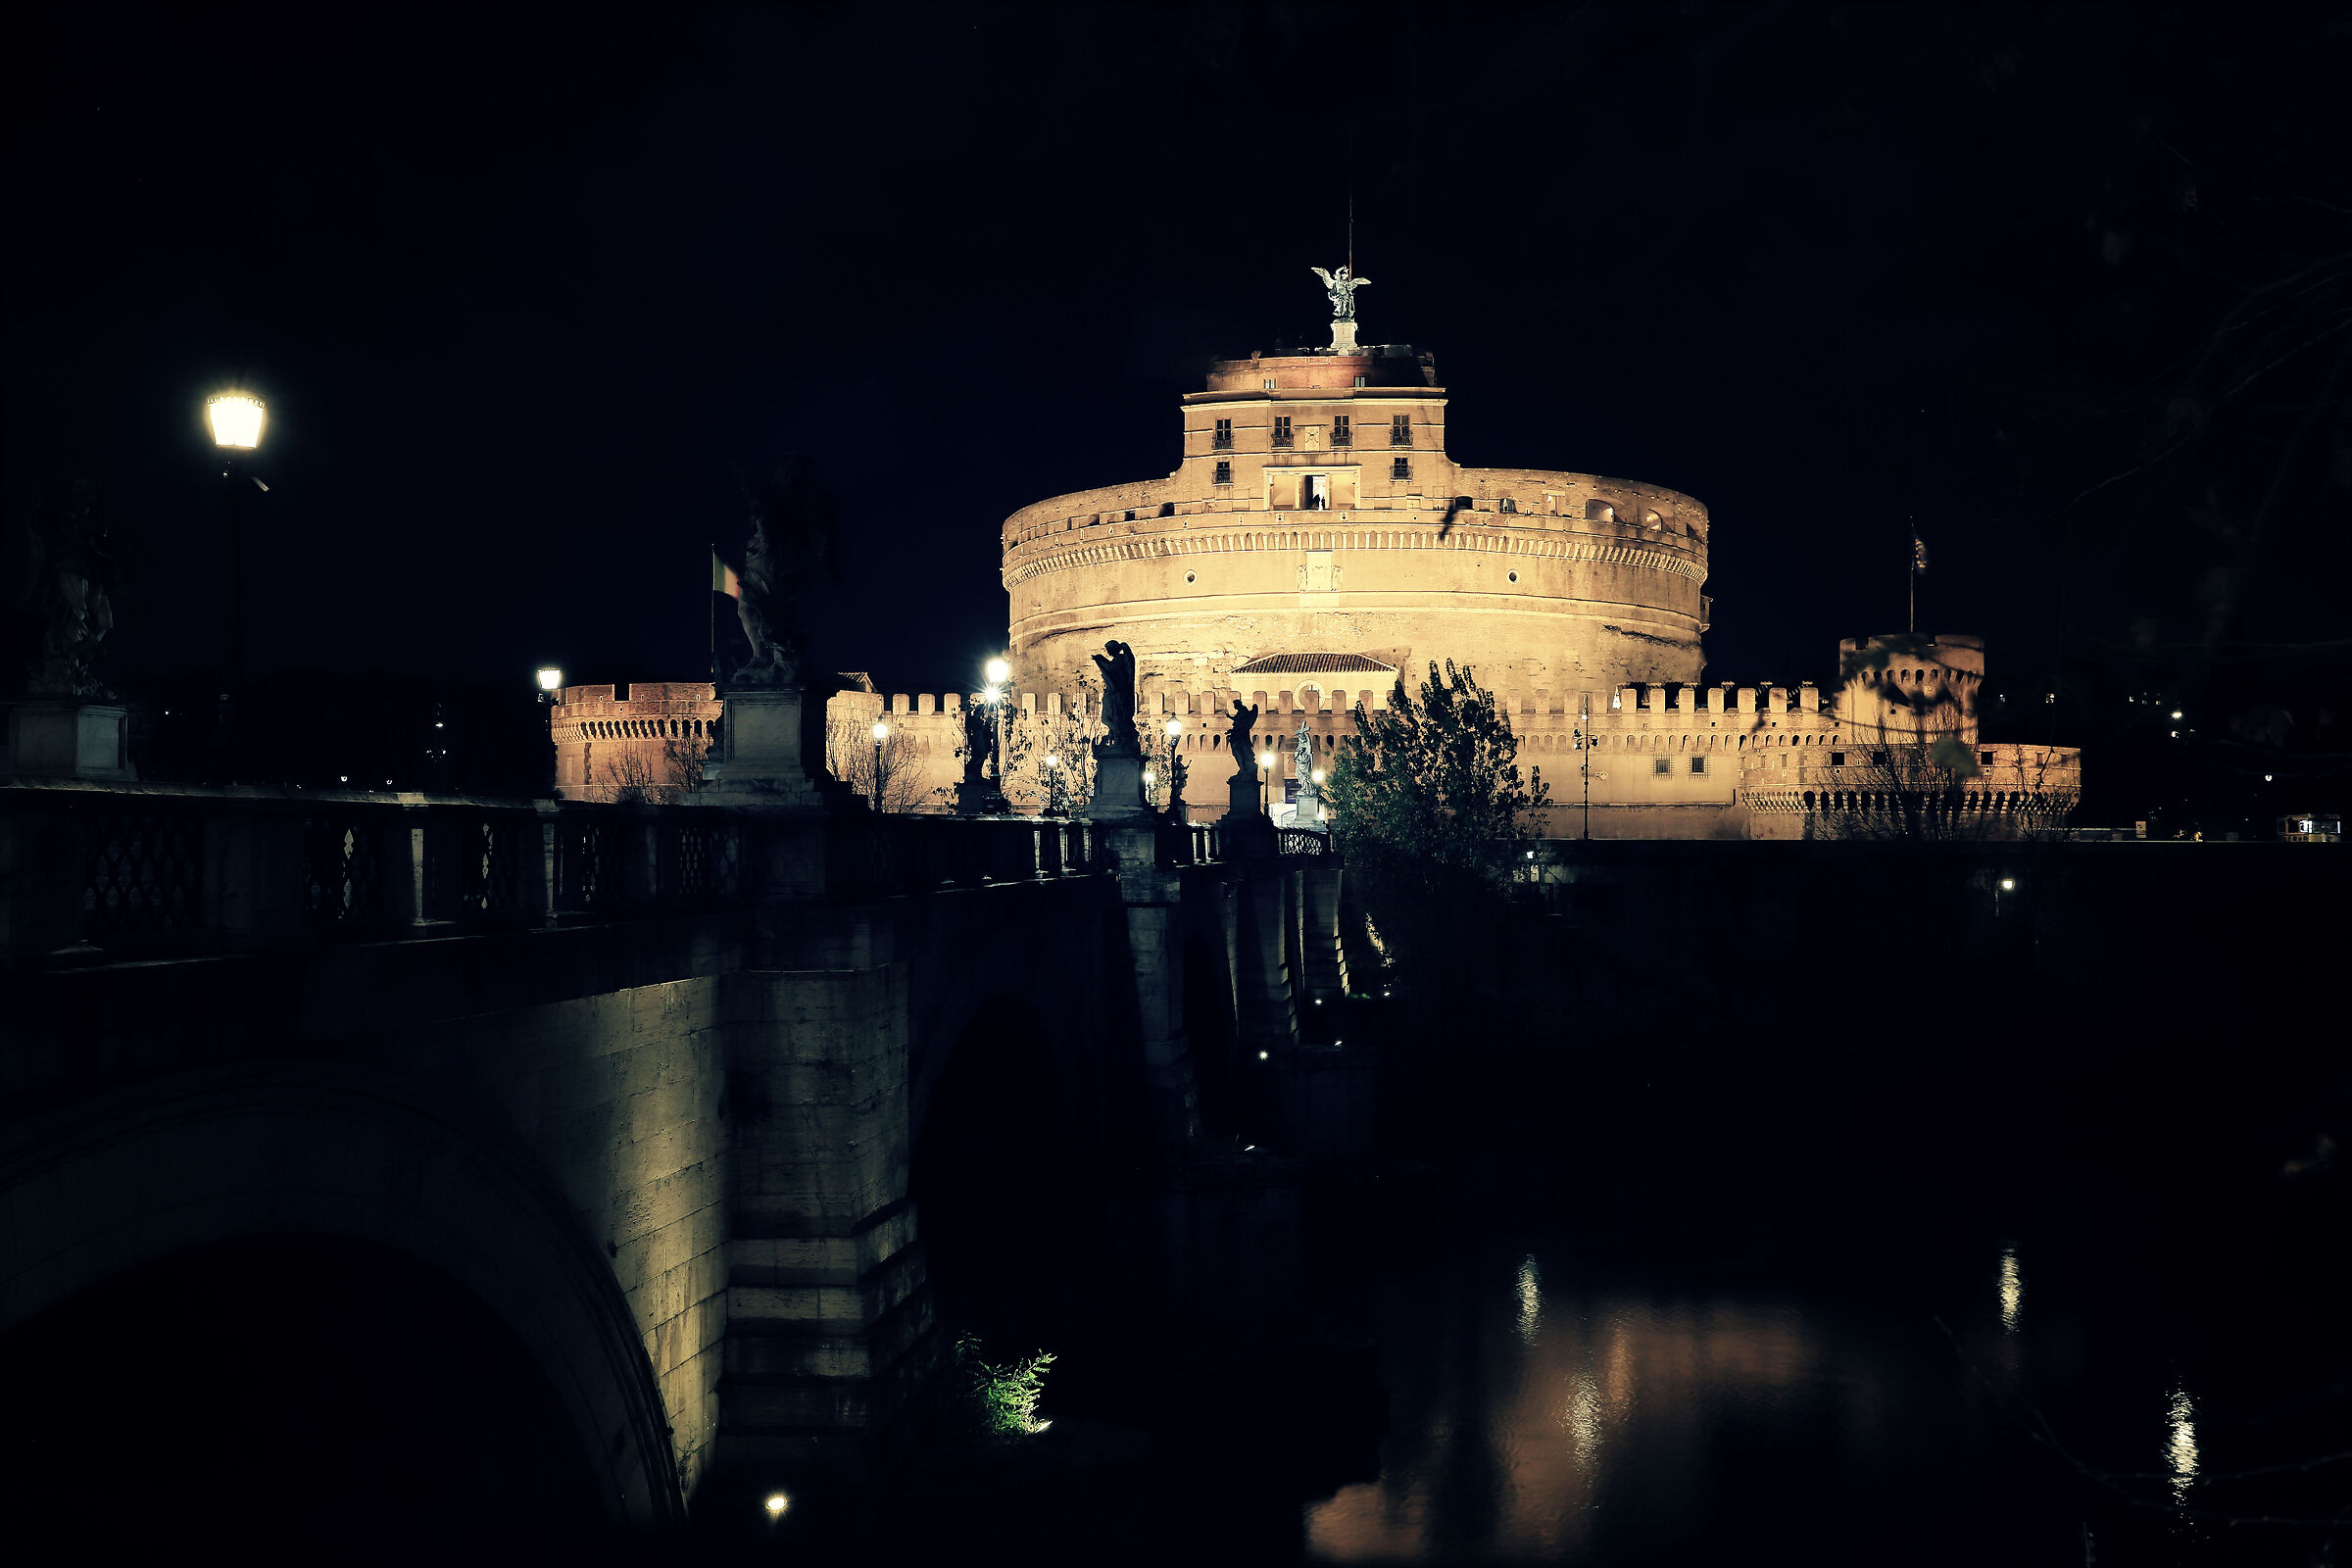 An evening in Rome...